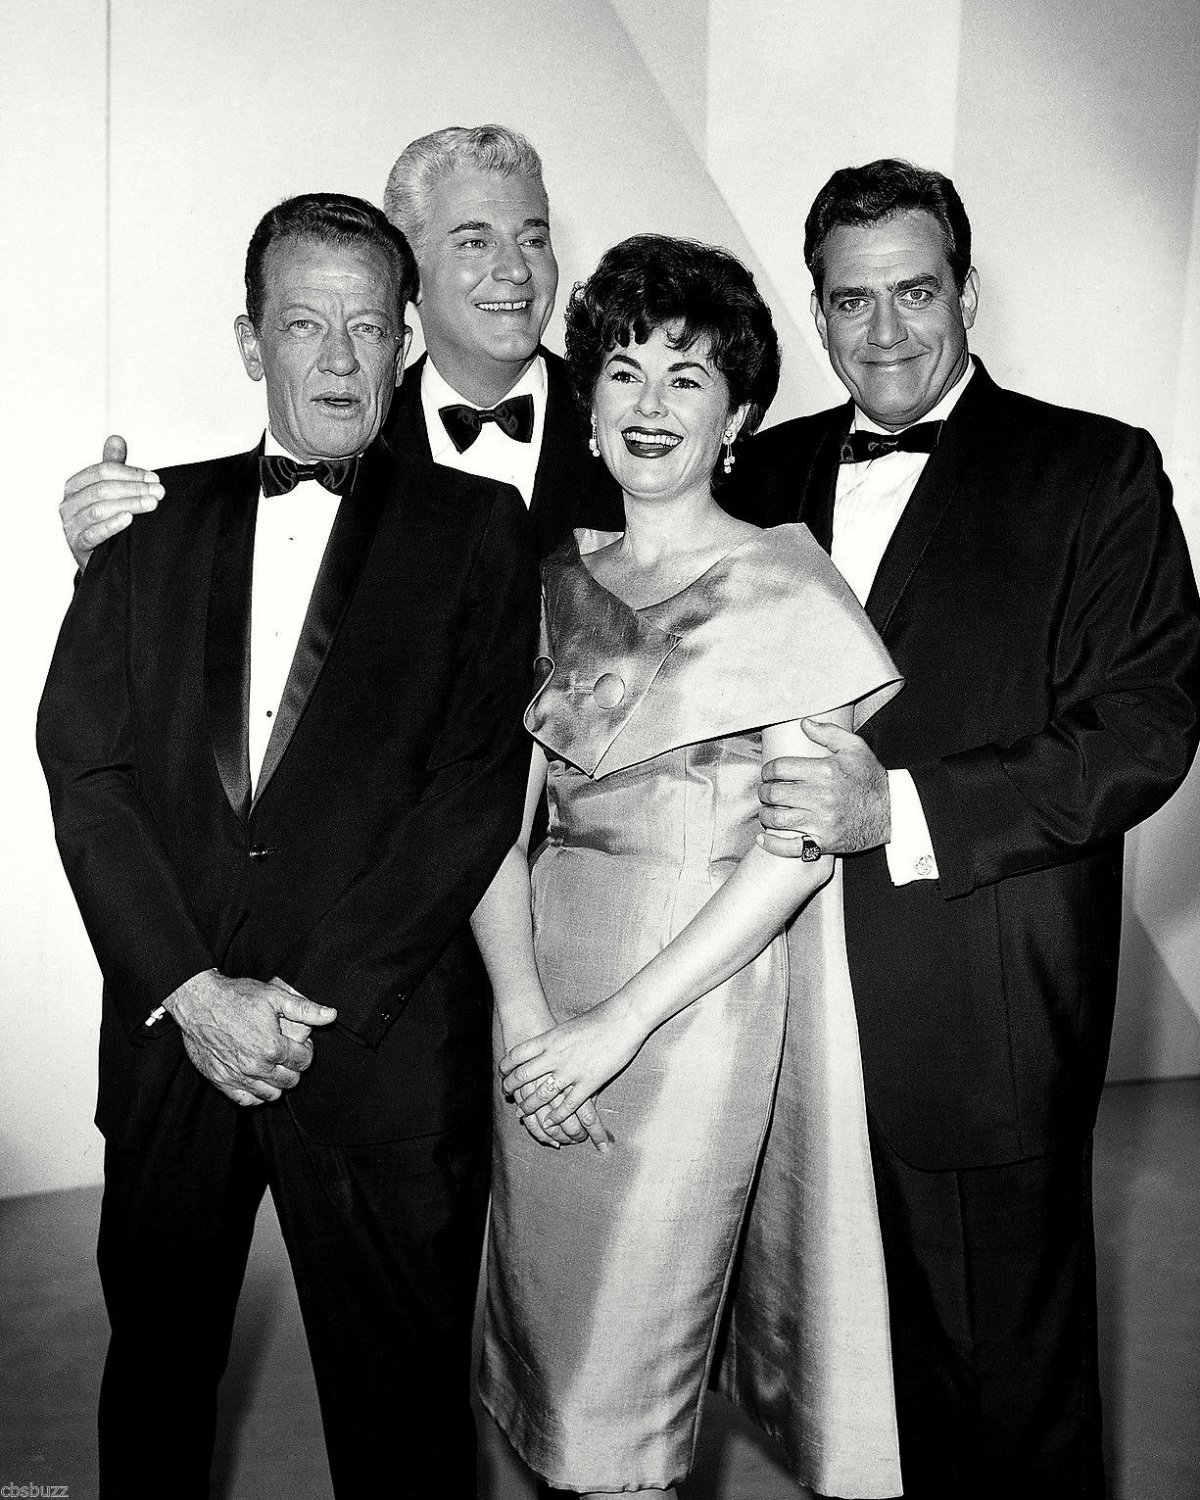 THE CAST OF THE TV SERIES 'PERRY MASON' 8X10 PUBLICITY PHOTO (NN140)